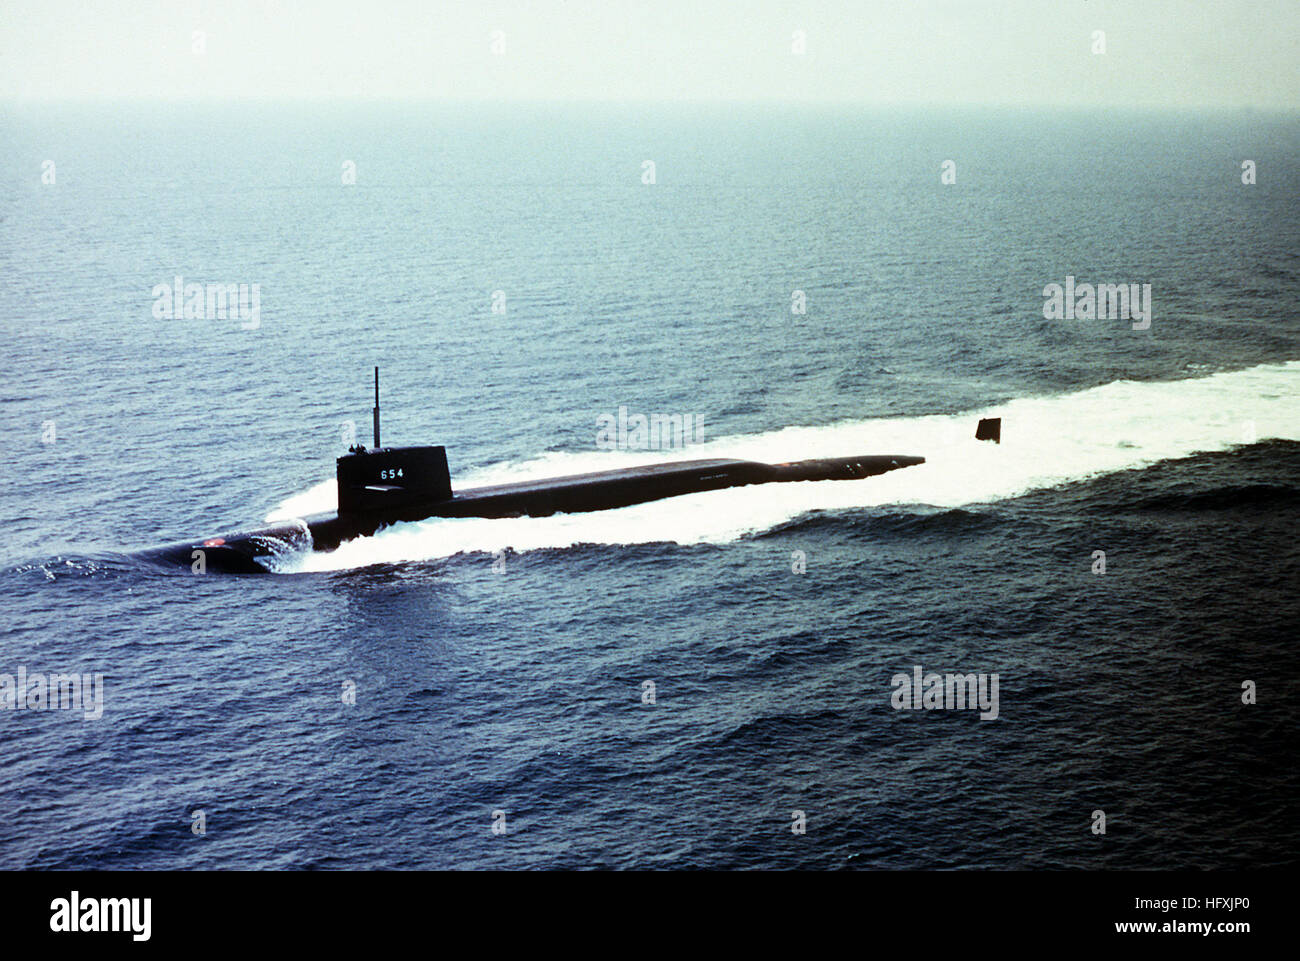 A port bow view of the nuclear-powered strategic missile submarine USS GEORGE C. MARSHALL (SSBN-654) underway. USS George C. Marshall (SSBN-654) underway in the Atlantic Ocean on 1 February 1991 Stock Photo